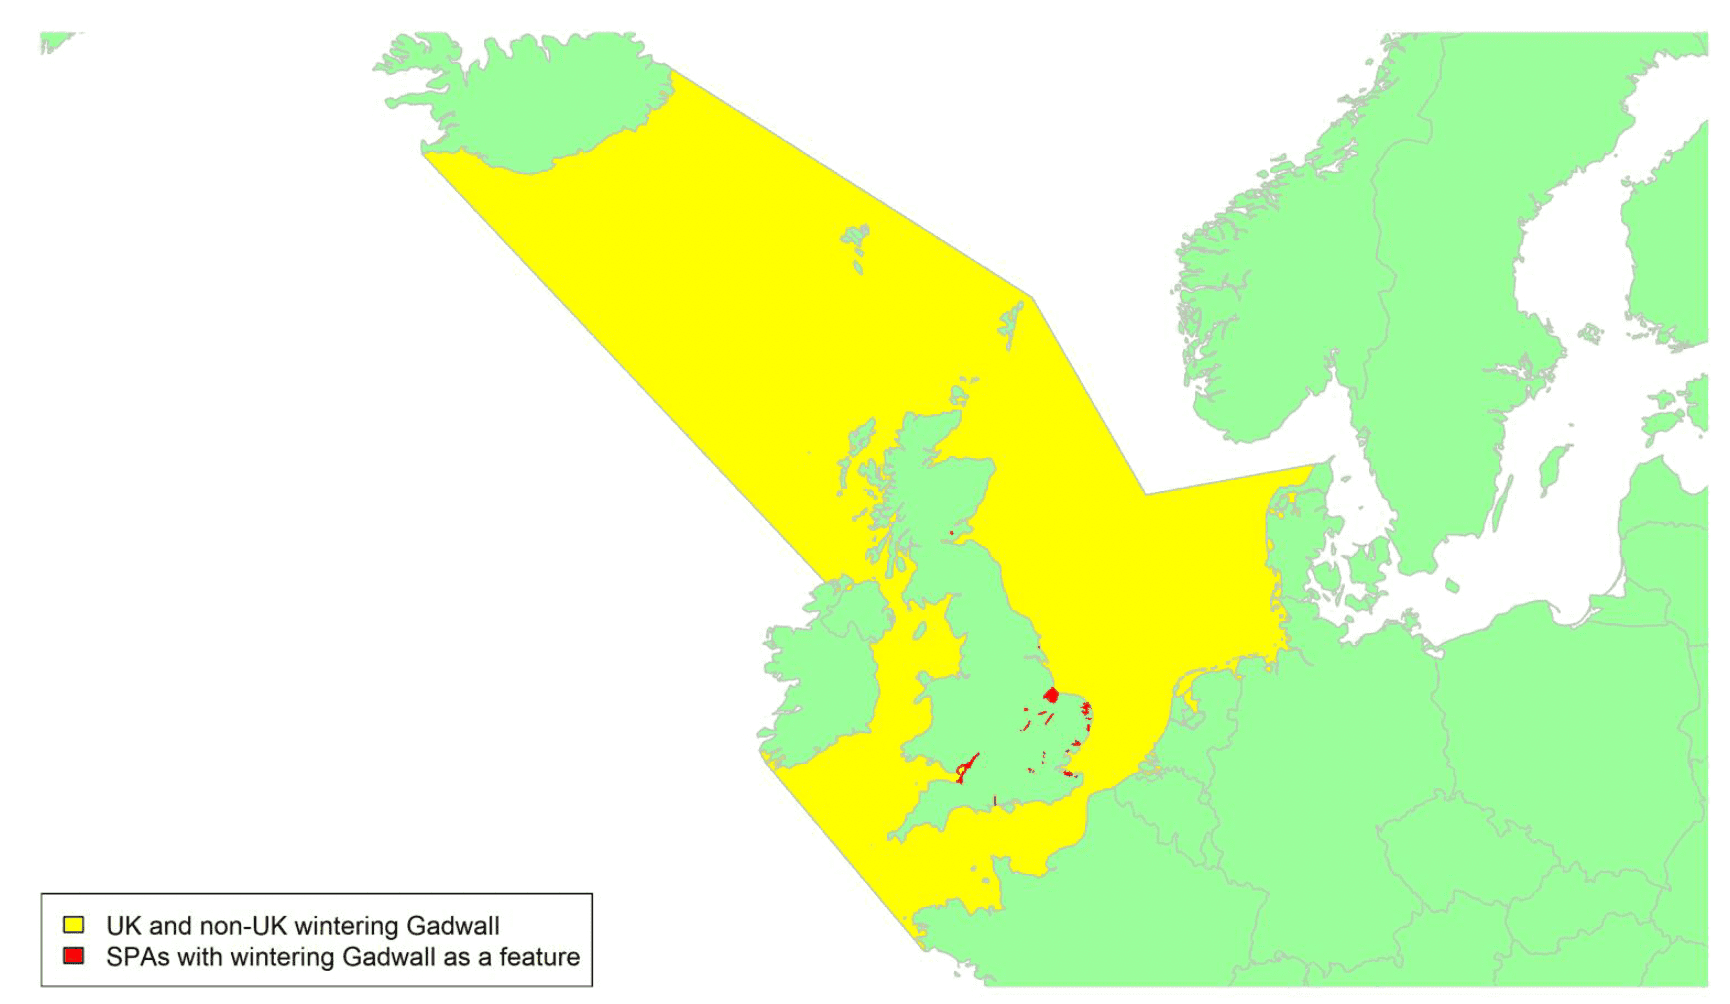 Map of North West Europe showing migratory routes and SPAs within the UK for wintering Gadwall as described in the text below.